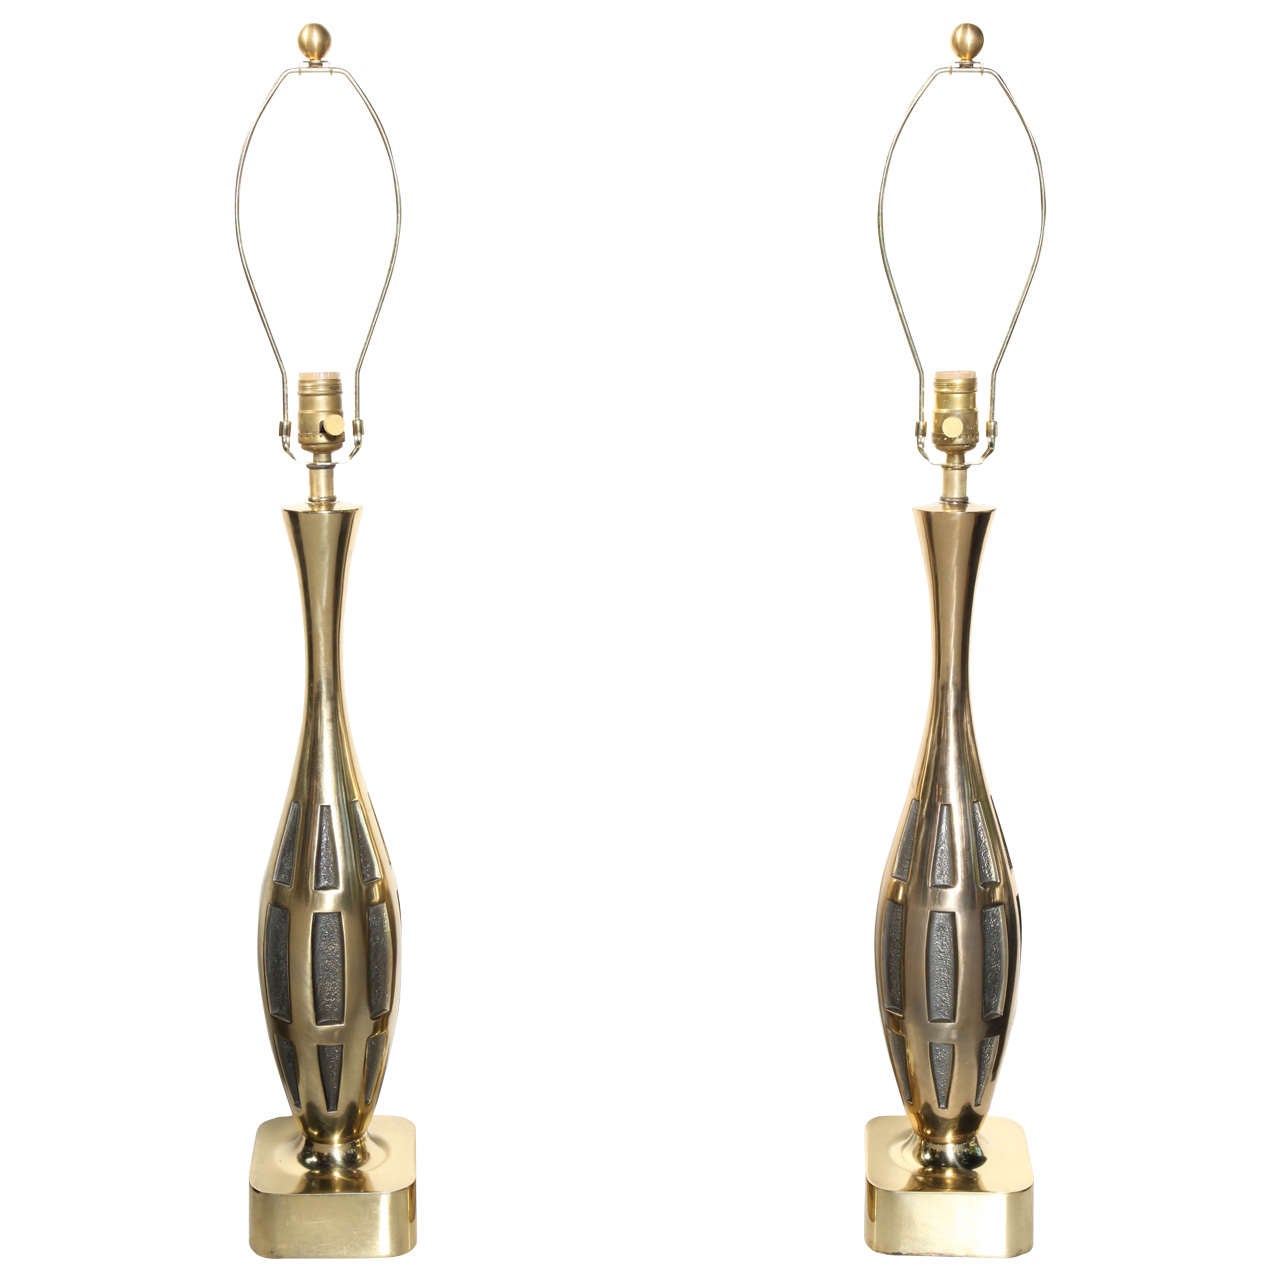 Tall Pair of Westwood Studios Brutalist Brass Table Lamps, circa 1950s